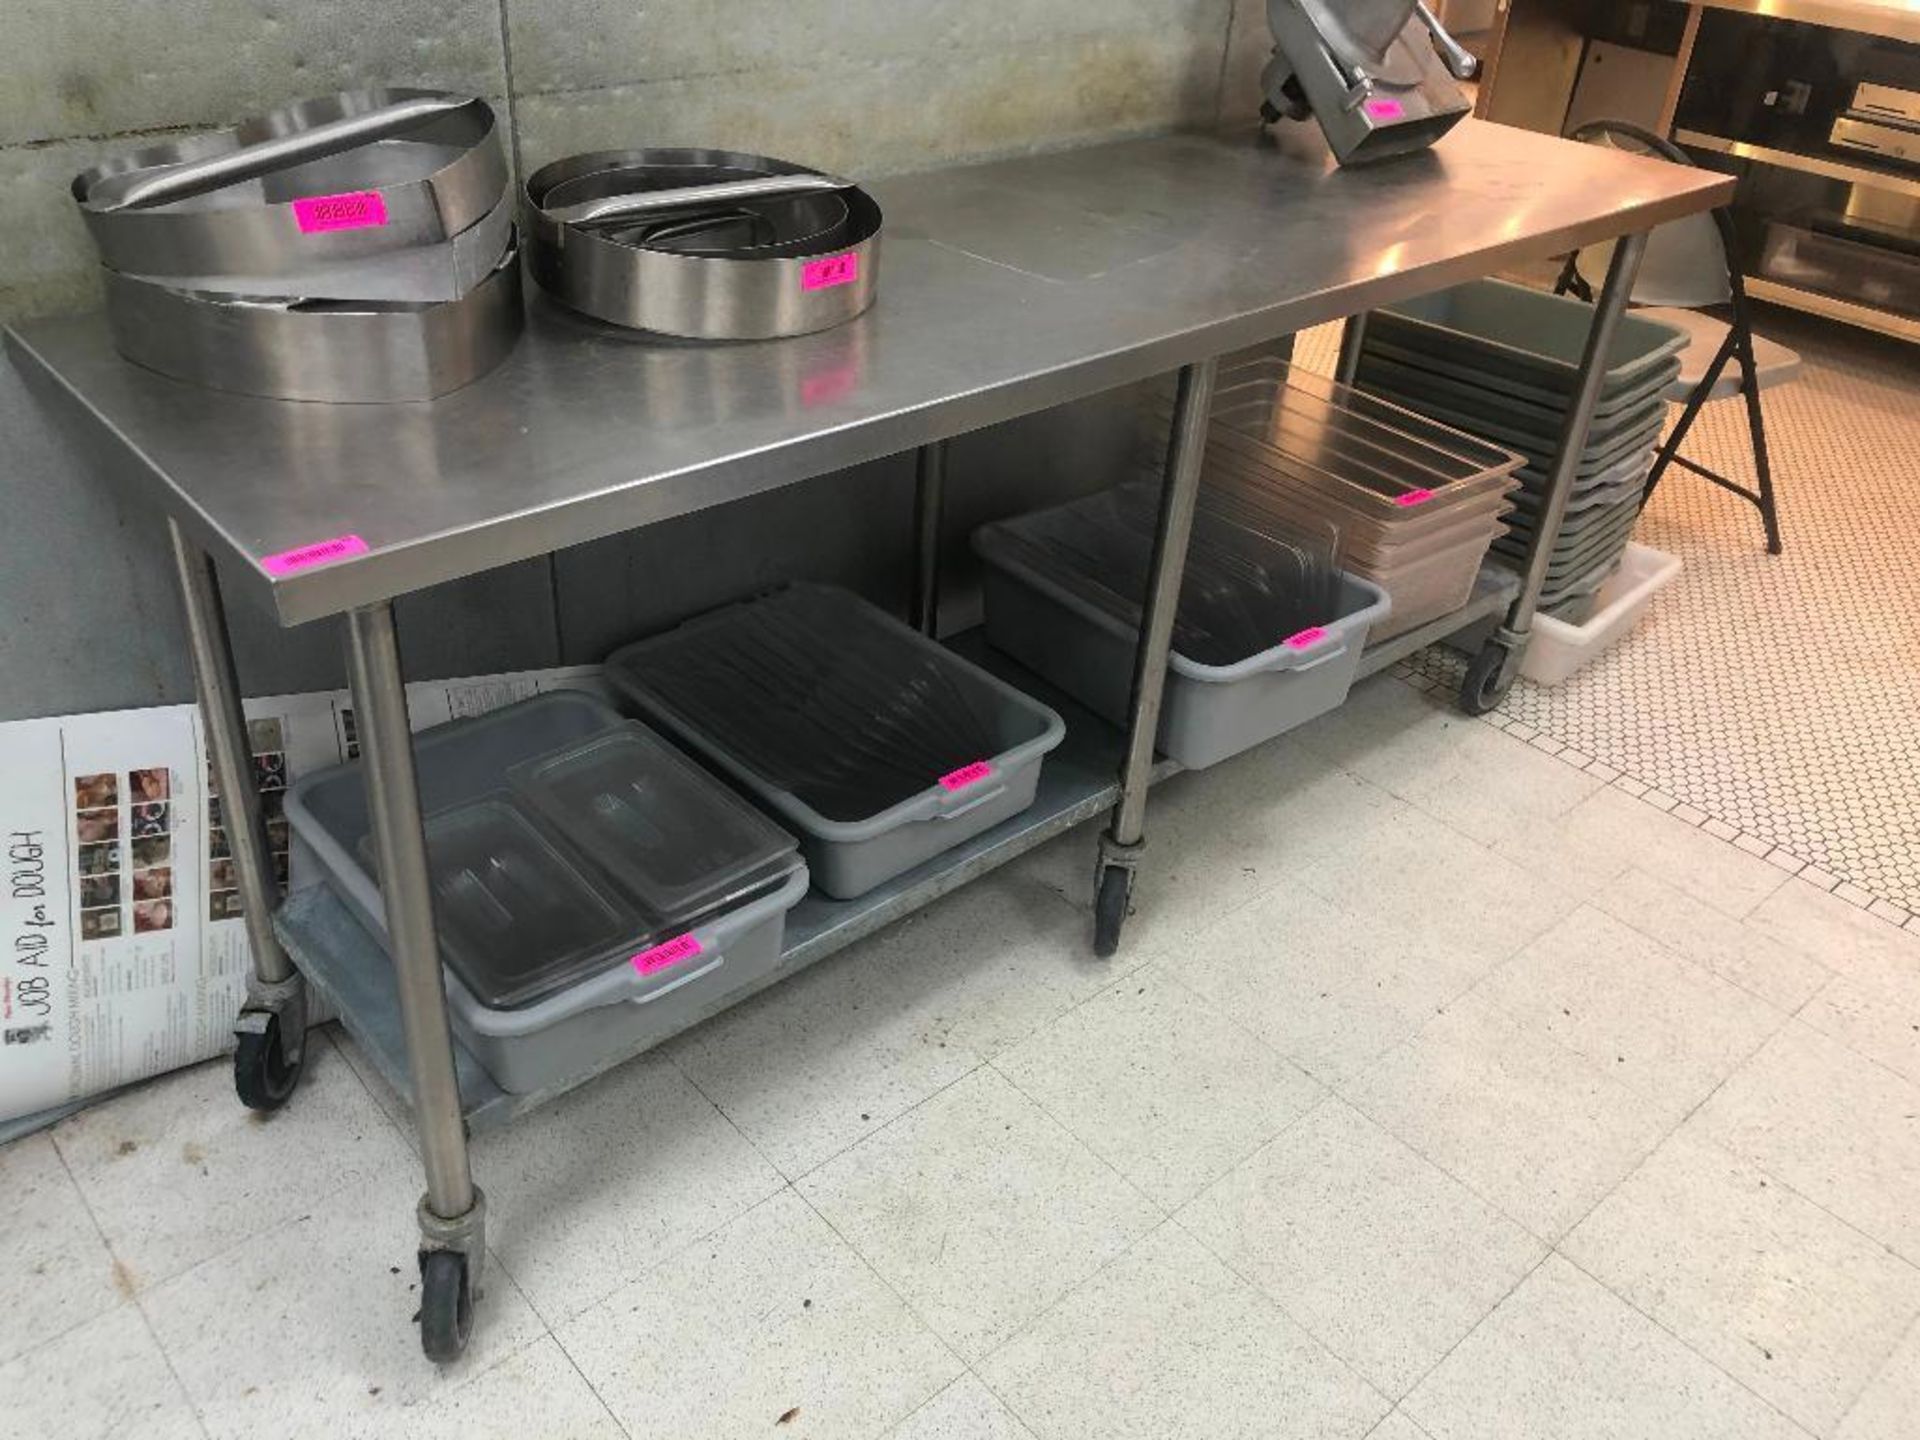 DESCRIPTION: 7' X 24" STAINLESS TABLE W/ GALVANIZED UNDER SHELF. ADDITIONAL INFORMATION: NO CONTENTS